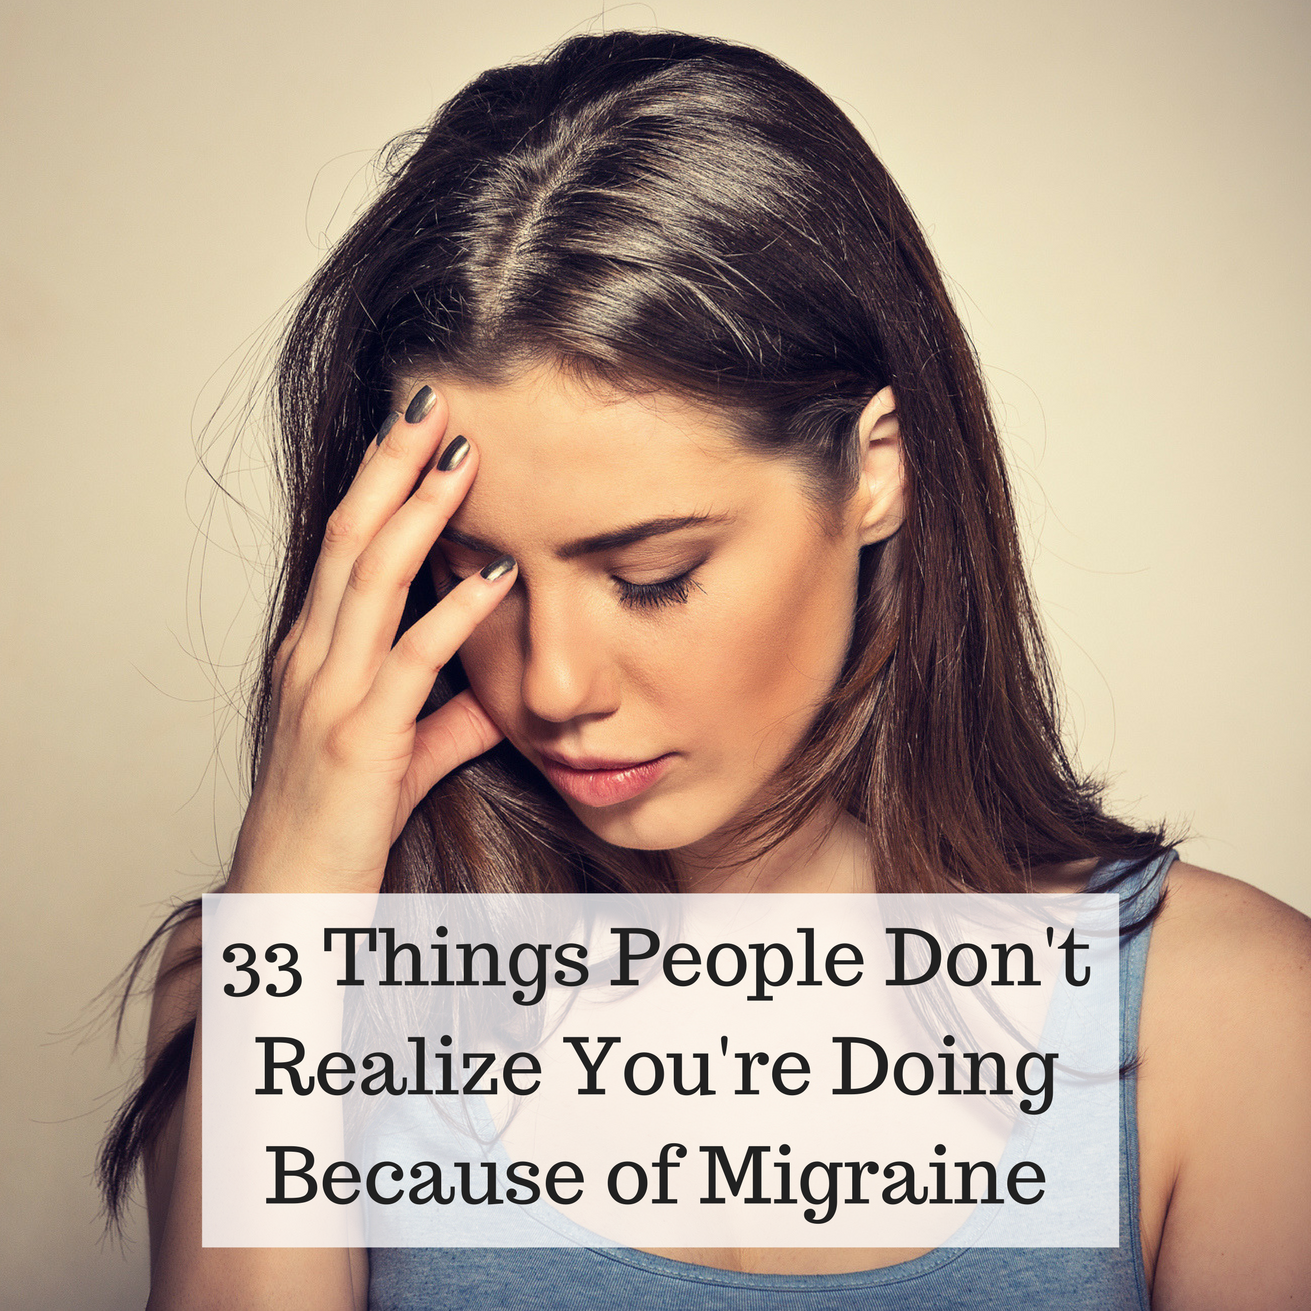 33 Things People Don't Realize You're Doing Because of Migraine